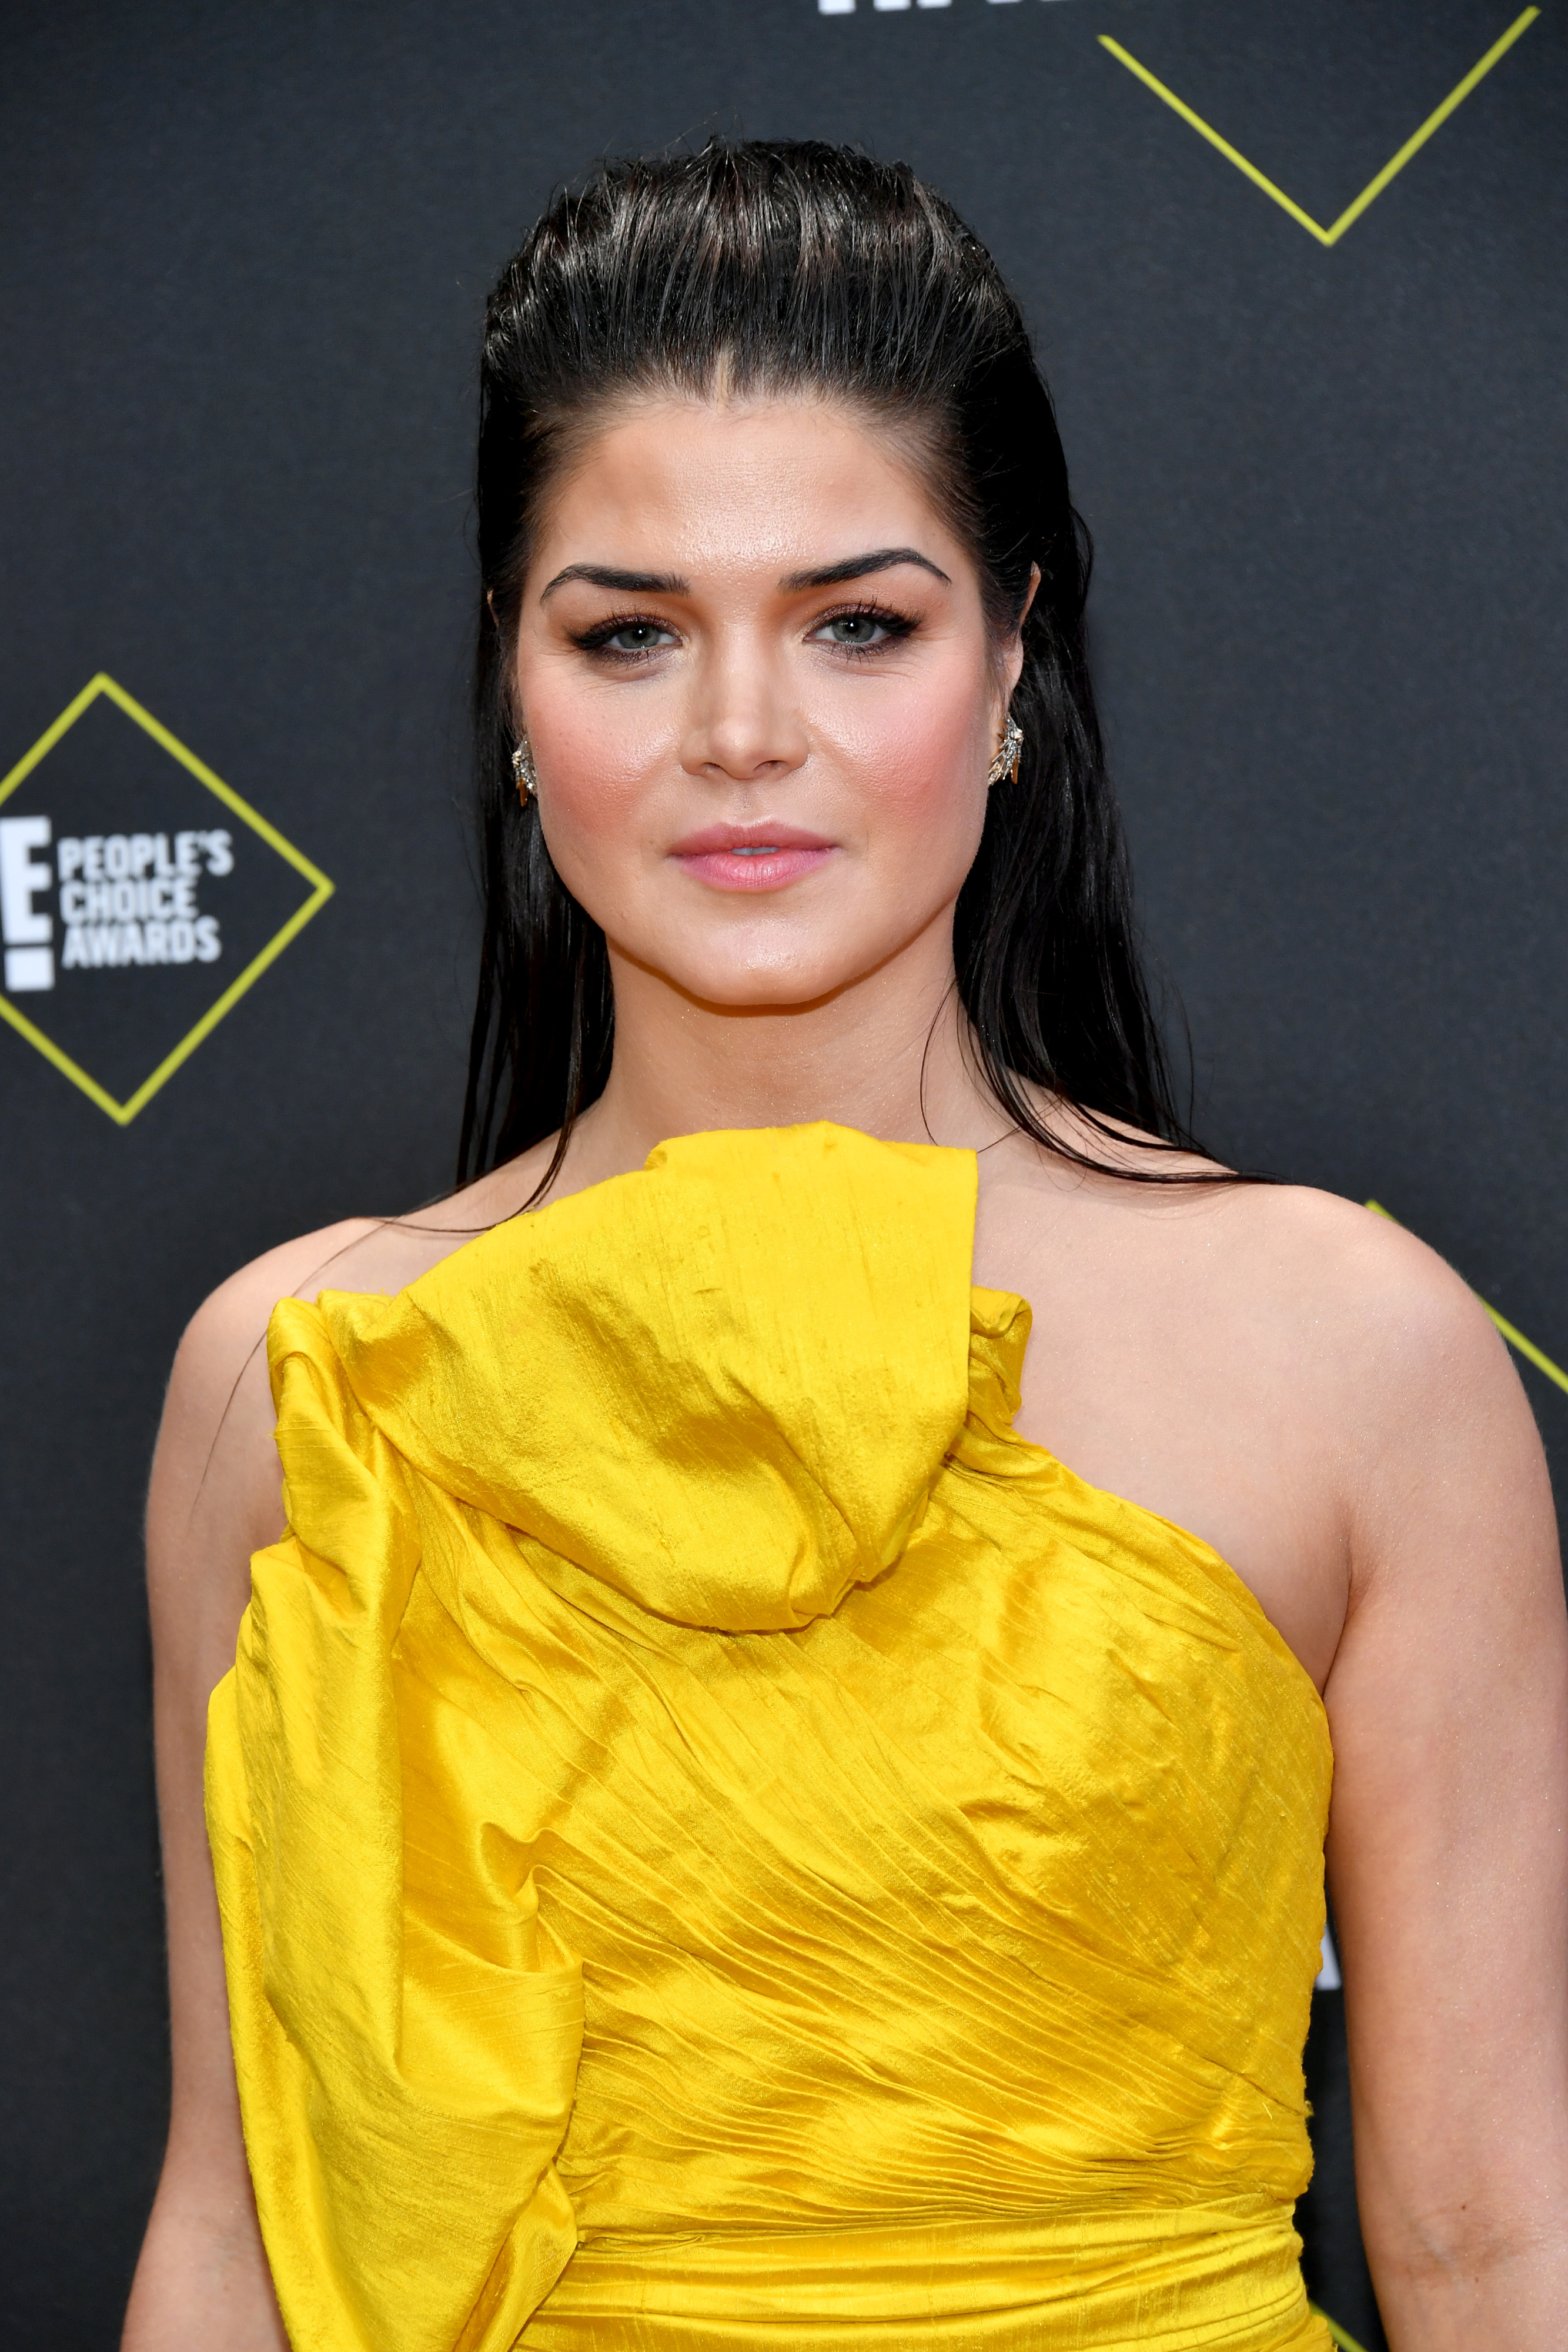 Marie Avgeropoulos arrives to the 2019 E! People's Choice Awards at the Barker Hangar on November 10, 2019, in Santa Monica, California.